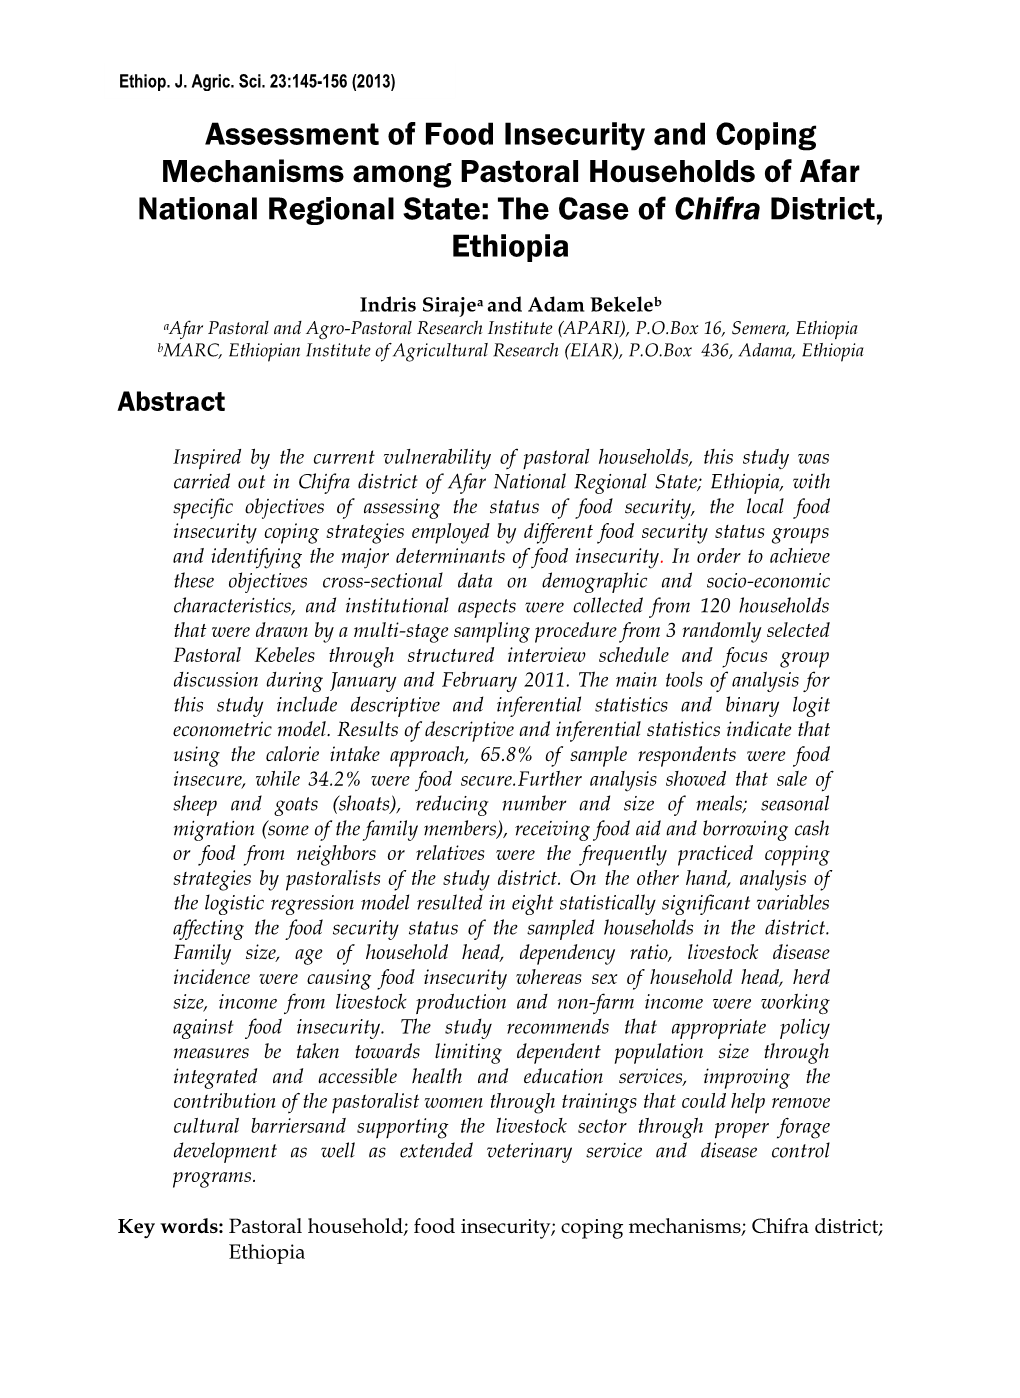 Assessment of Food Insecurity and Coping Mechanisms Among Pastoral Households of Afar National Regional State: the Case of Chifra District, Ethiopia